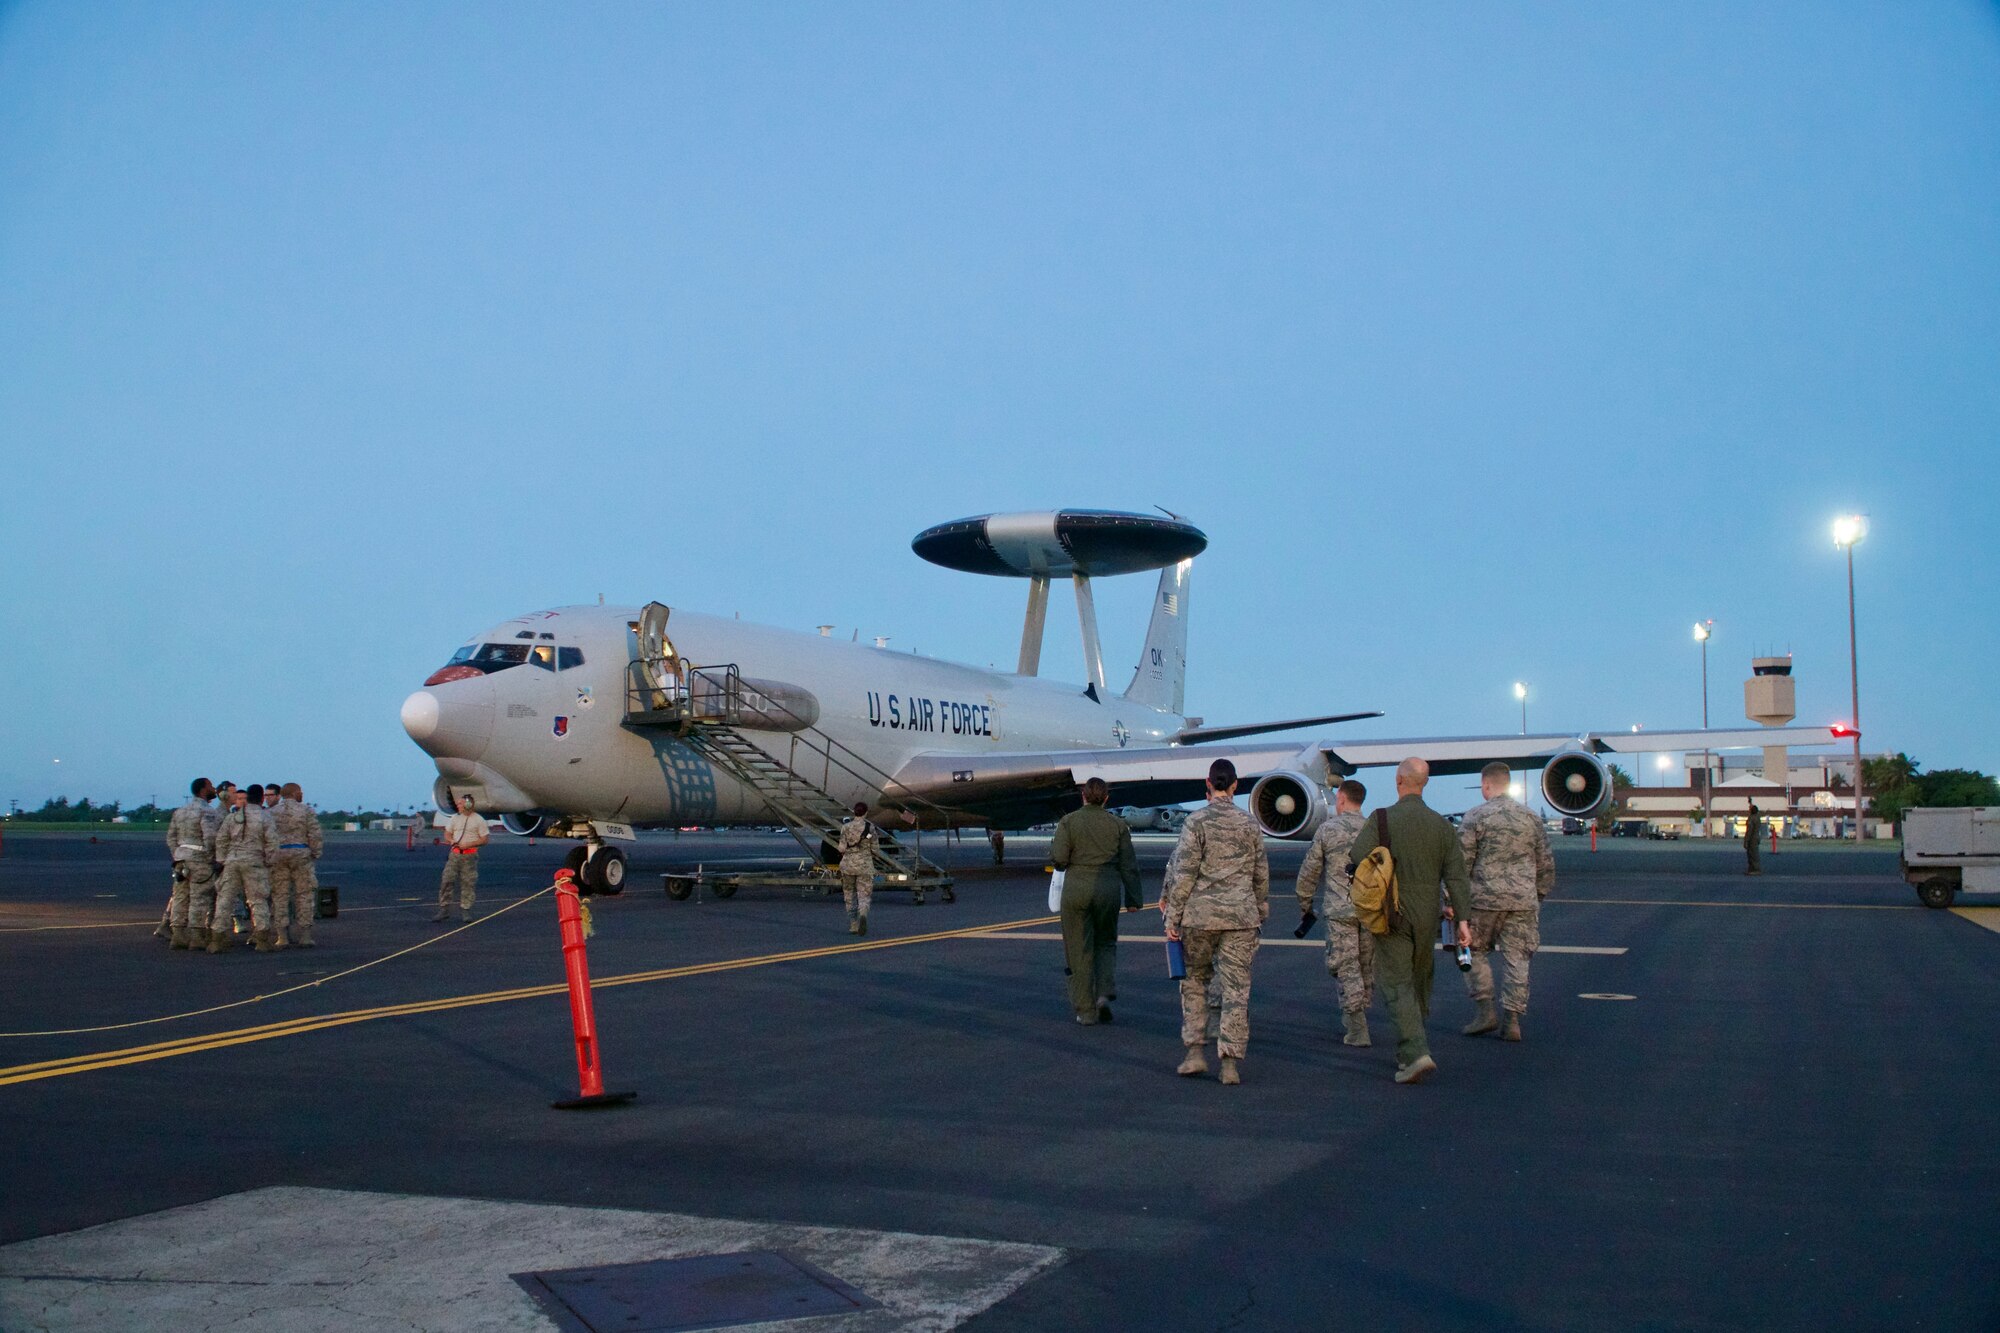 Crew members from the 513th Air Control Group board the Boeing E-3 Sentry aircraft at Joint Base Pearl Harbor-Hickam on Jan. 24. 2018 as part of Sentry Aloha exercises.